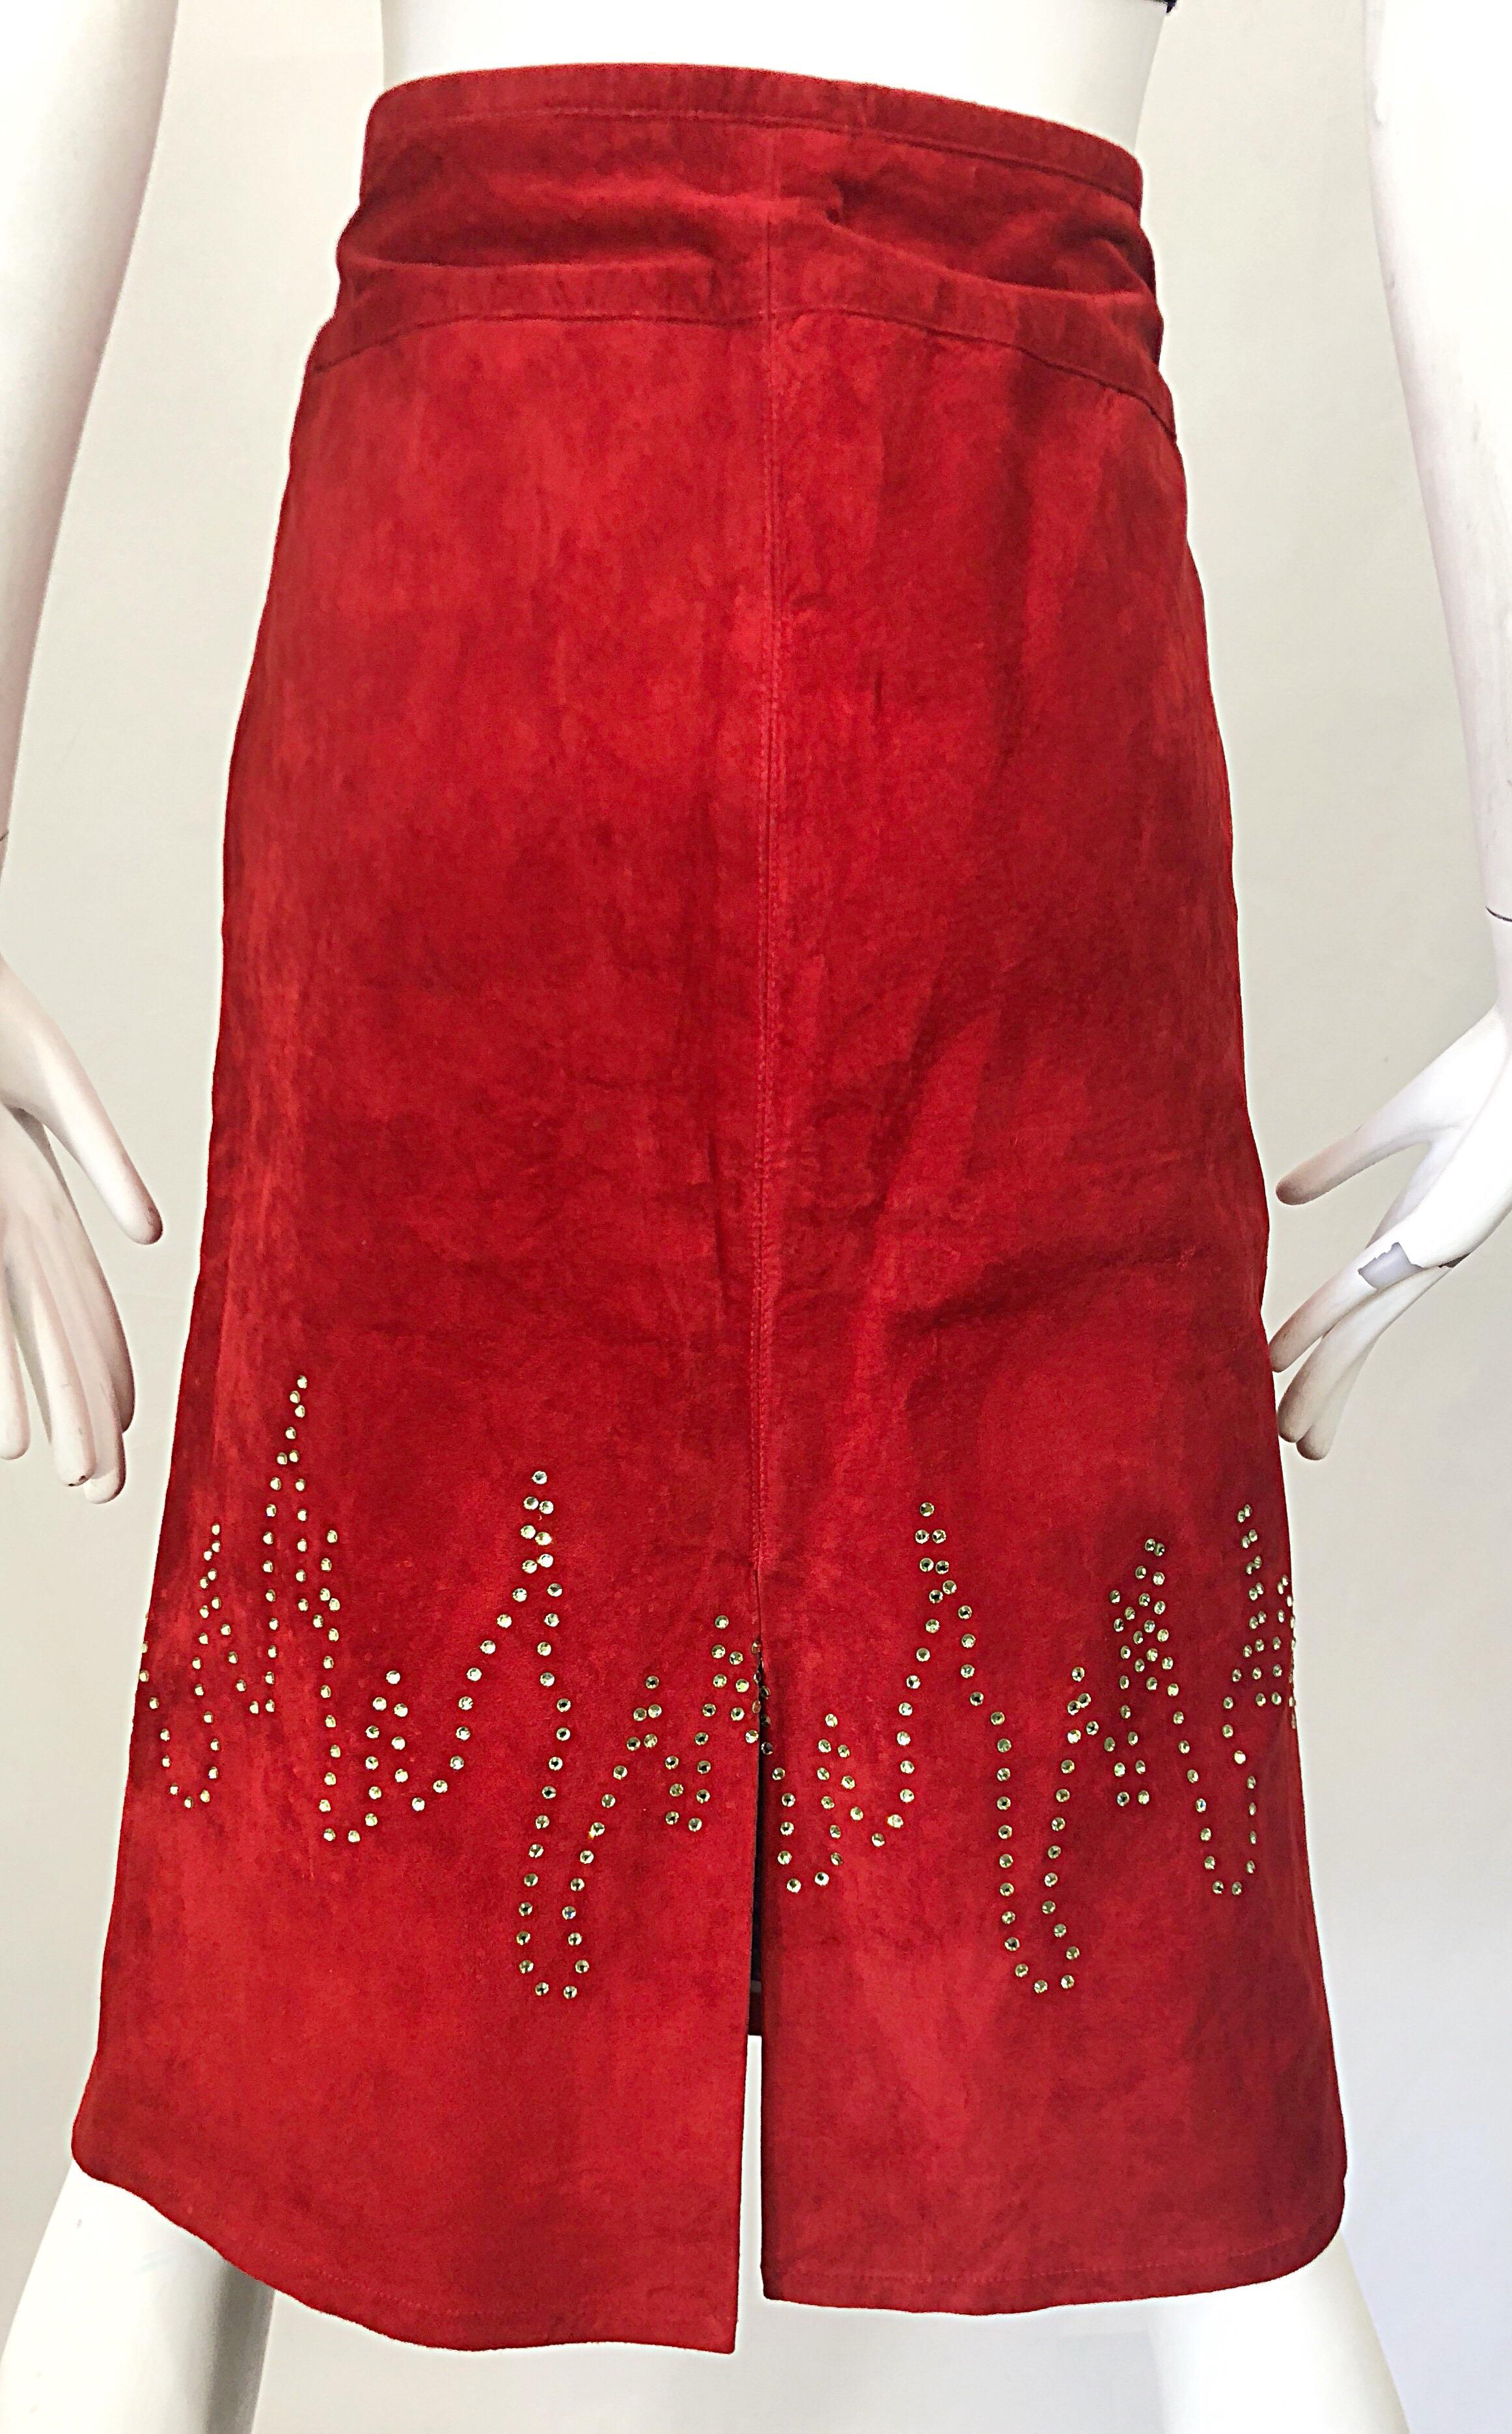 1990s Fire Engine Red Suede Leather + Rhinestones Flames Vintage Late 90s Skirt For Sale 3